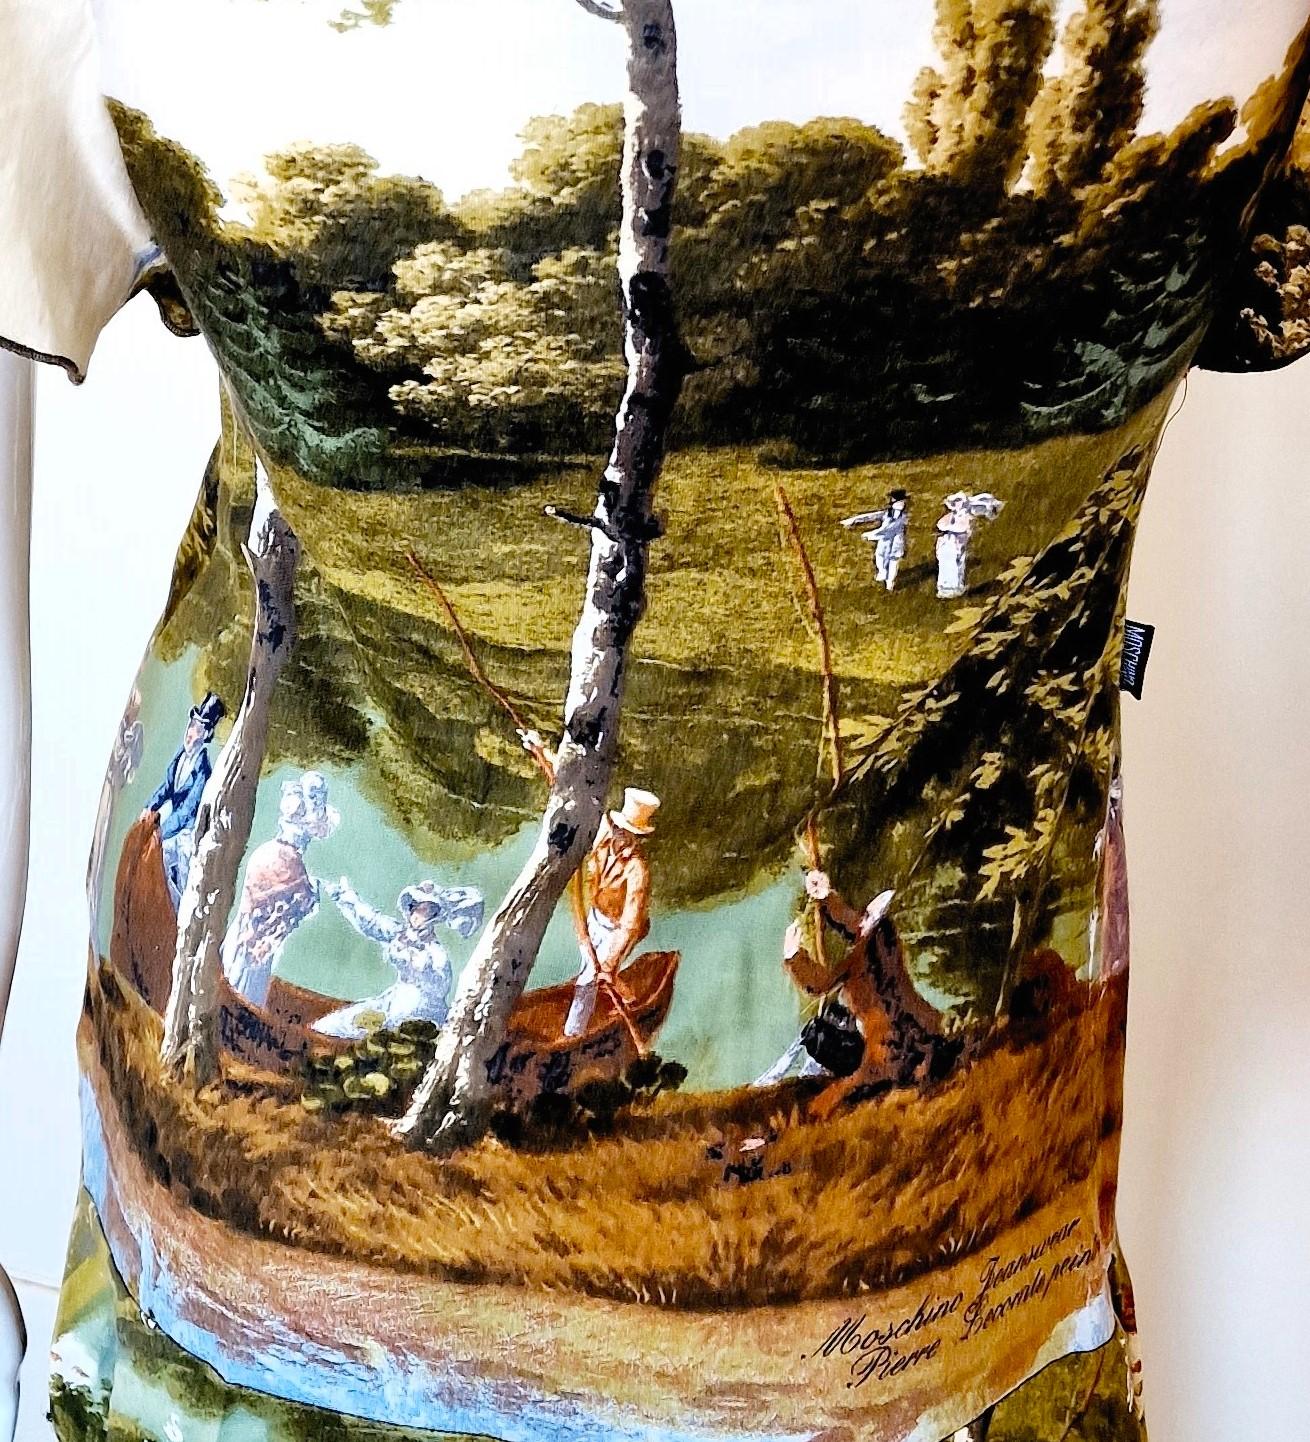 Moschino dress with Pierre Lecomte`s painting pattern.

LIKE NEW!

SIZE
Small.
Marked size: IT40 / USA6  / FR36 / GB10 / D36.
Length: 81 cm / 31.9 inch
Bust: 38 cm / 15 inch
Waist: 33 cm / 13 inch
Hips: 43 cm / 16.9 inch

Made in Italy!